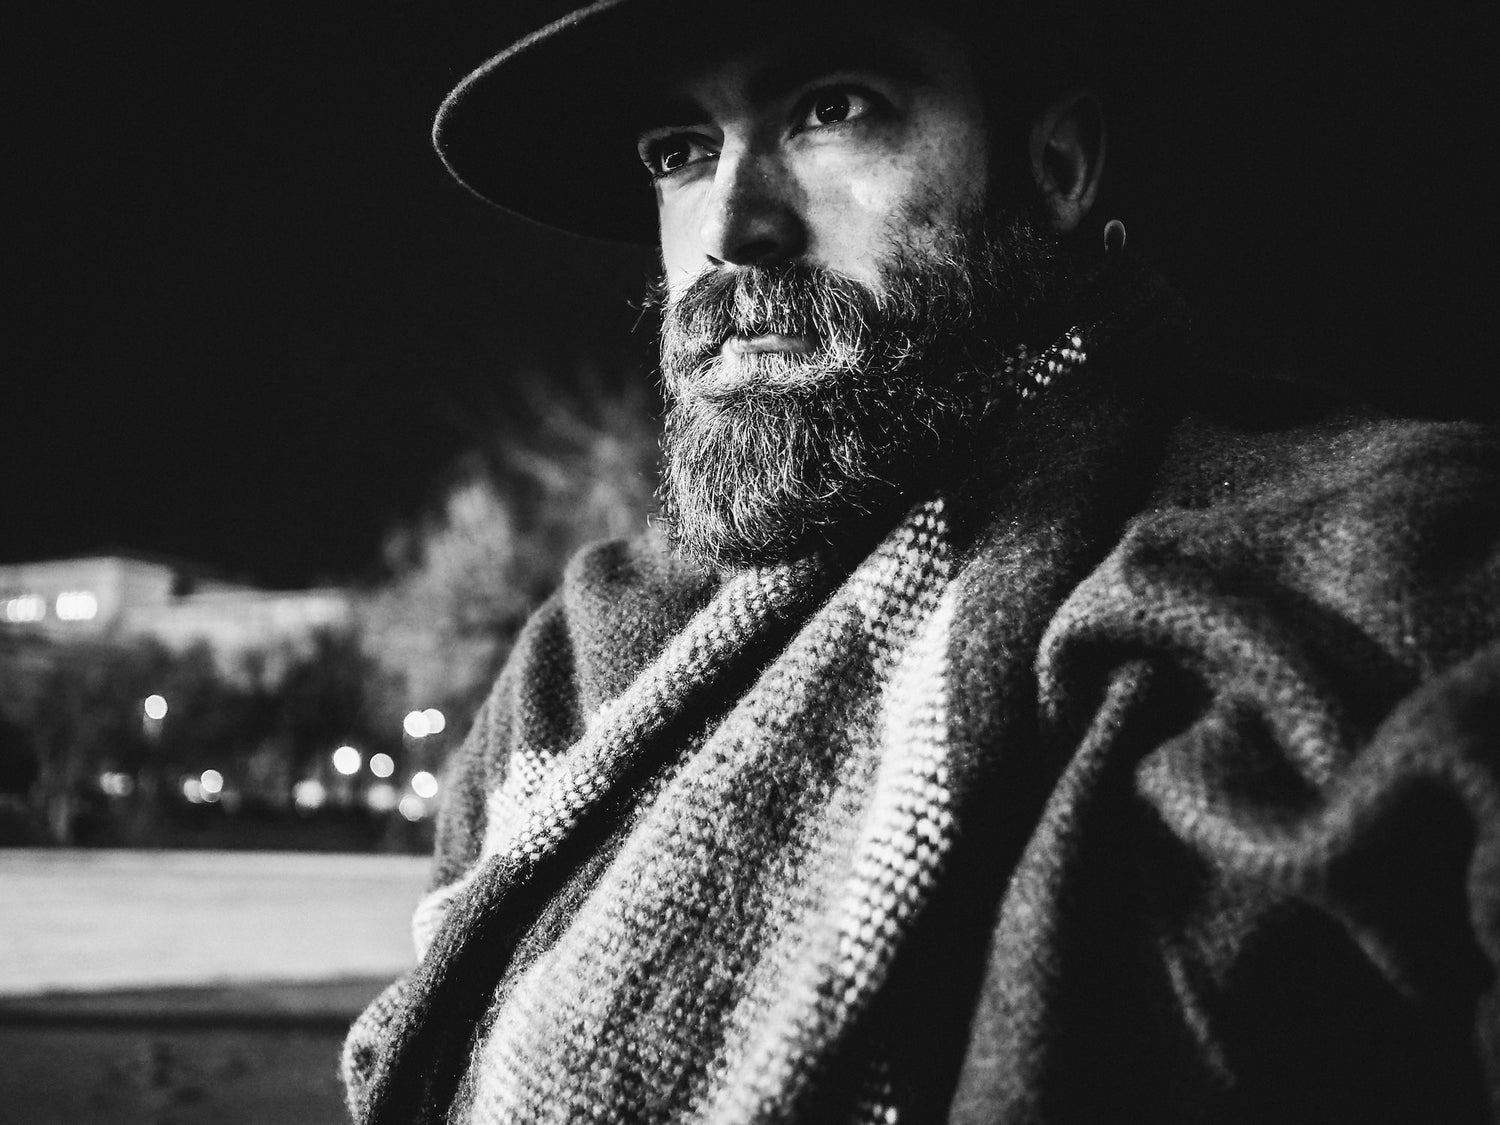 Daniel-horvath-black-and-white-beard-picture